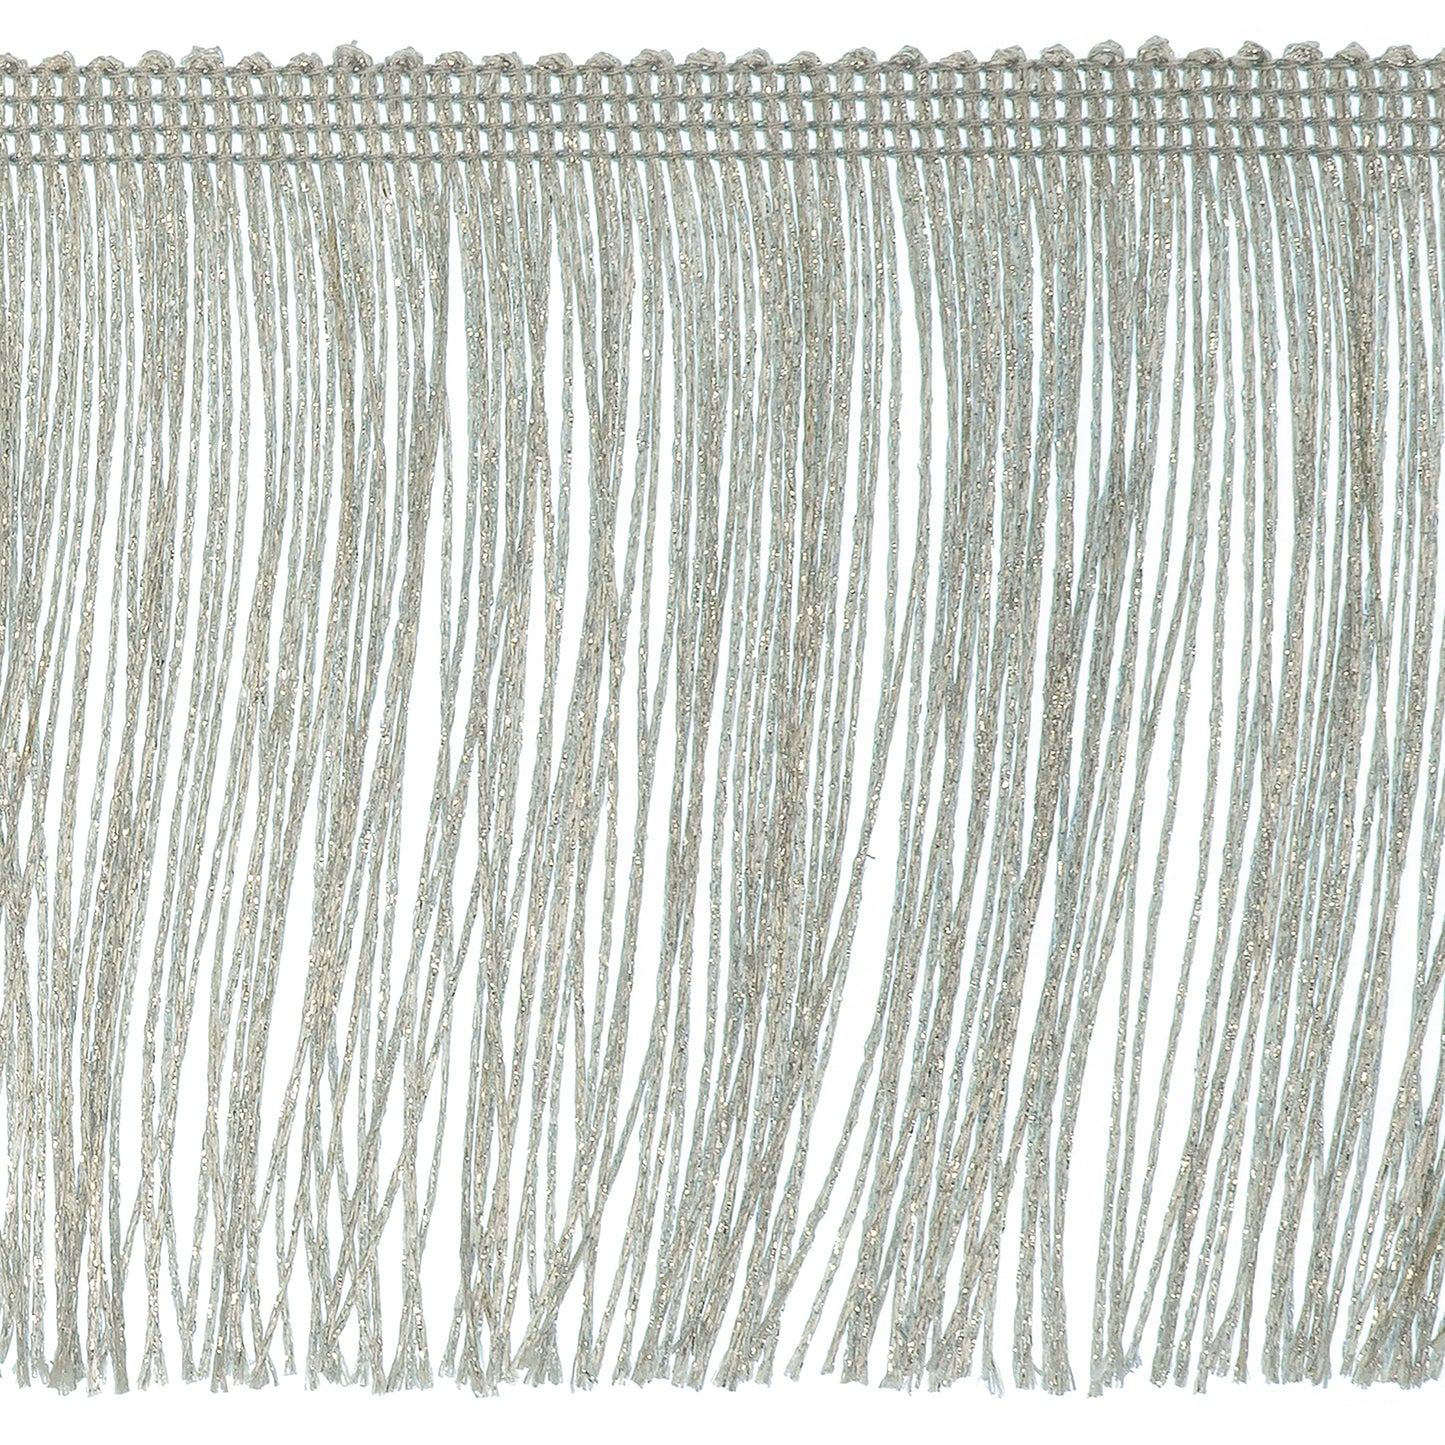 12" Glitter Chainette Fringe Trim (Sold by the Yard)